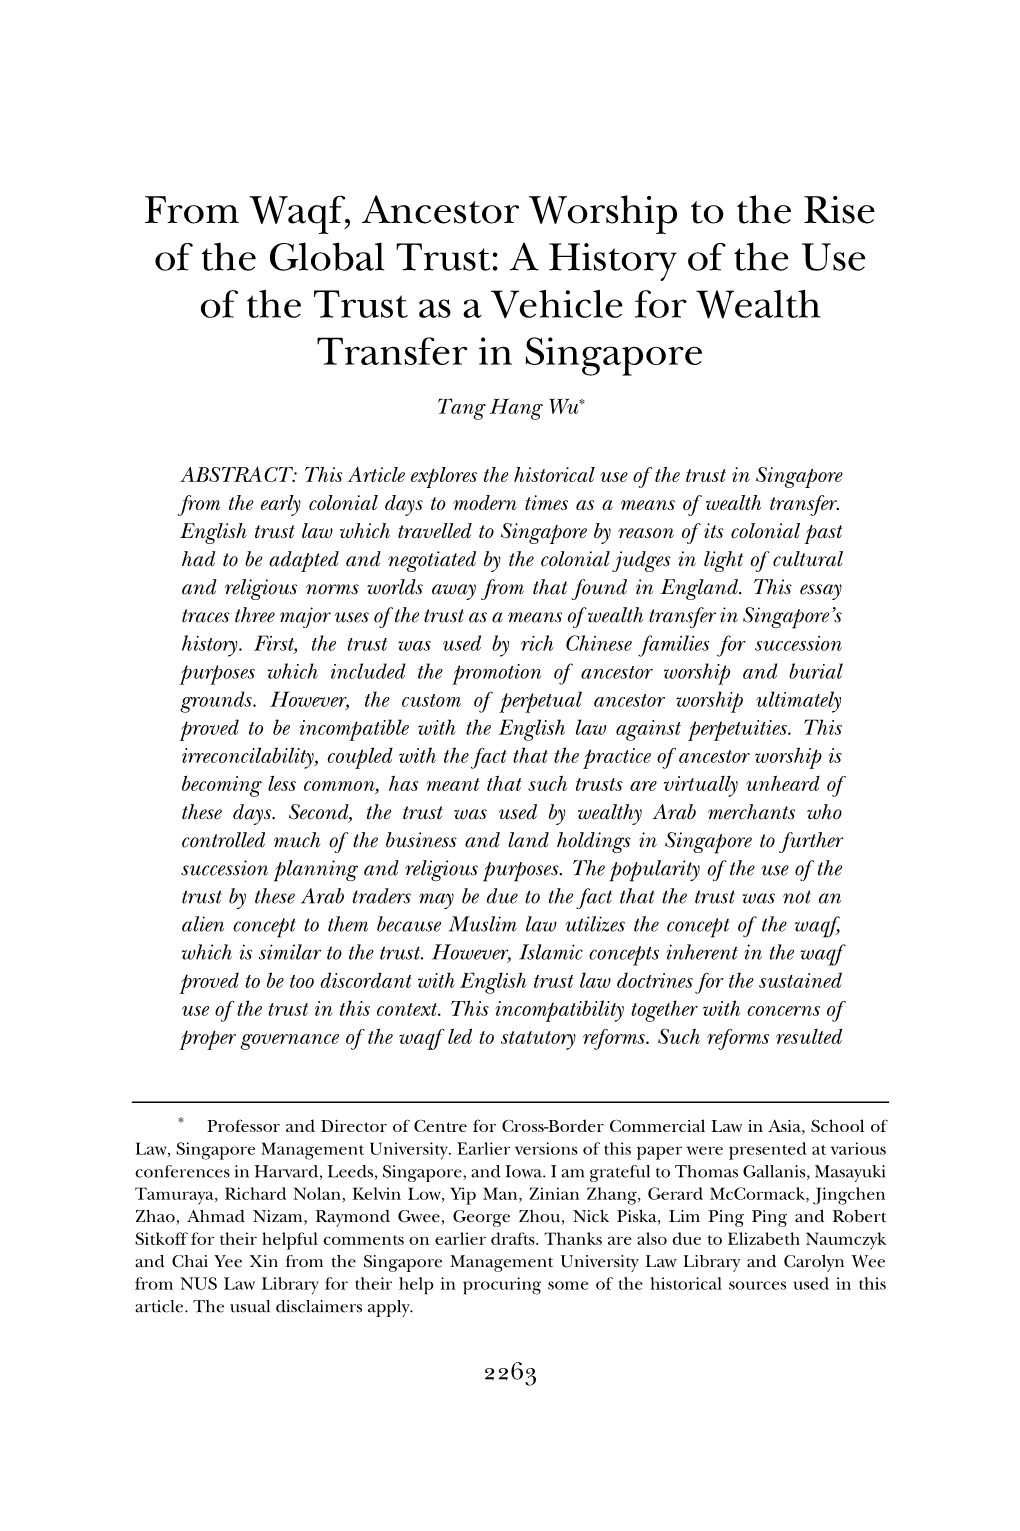 From Waqf, Ancestor Worship to the Rise of the Global Trust: a History of the Use of the Trust As a Vehicle for Wealth Transfer in Singapore